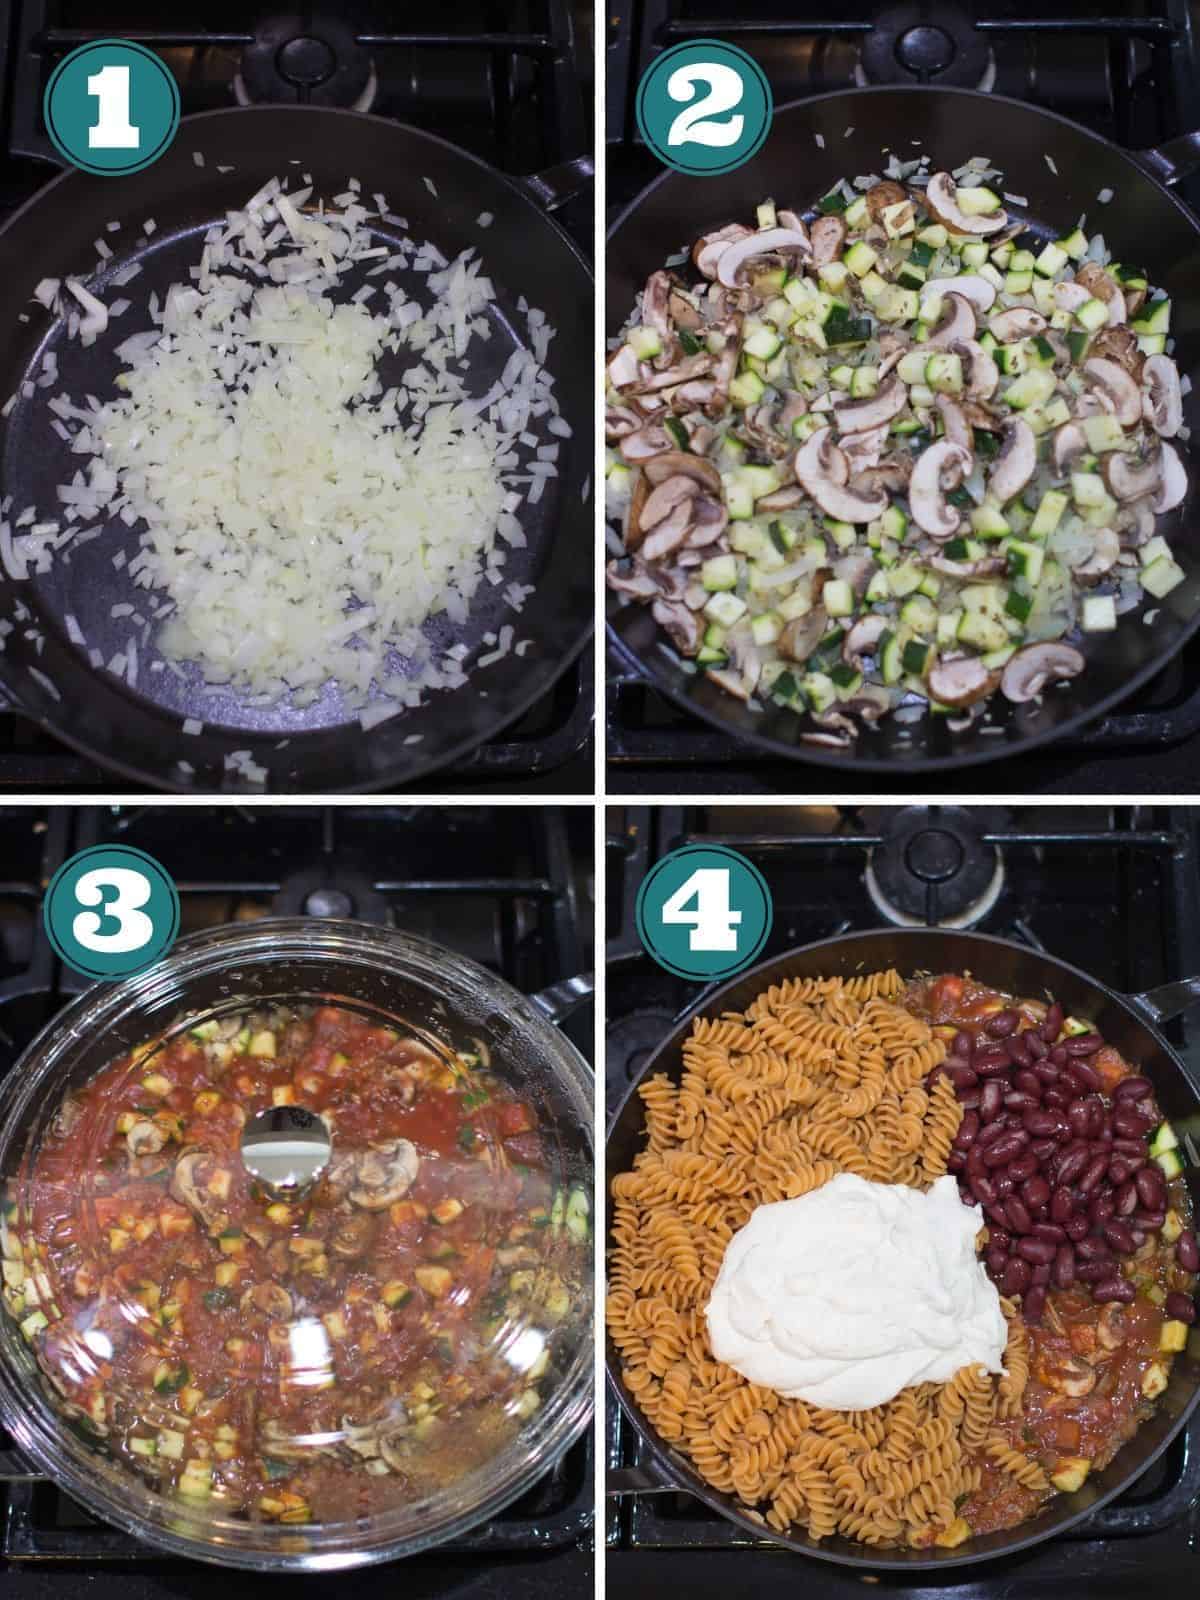 step by step instructions showing cooking process